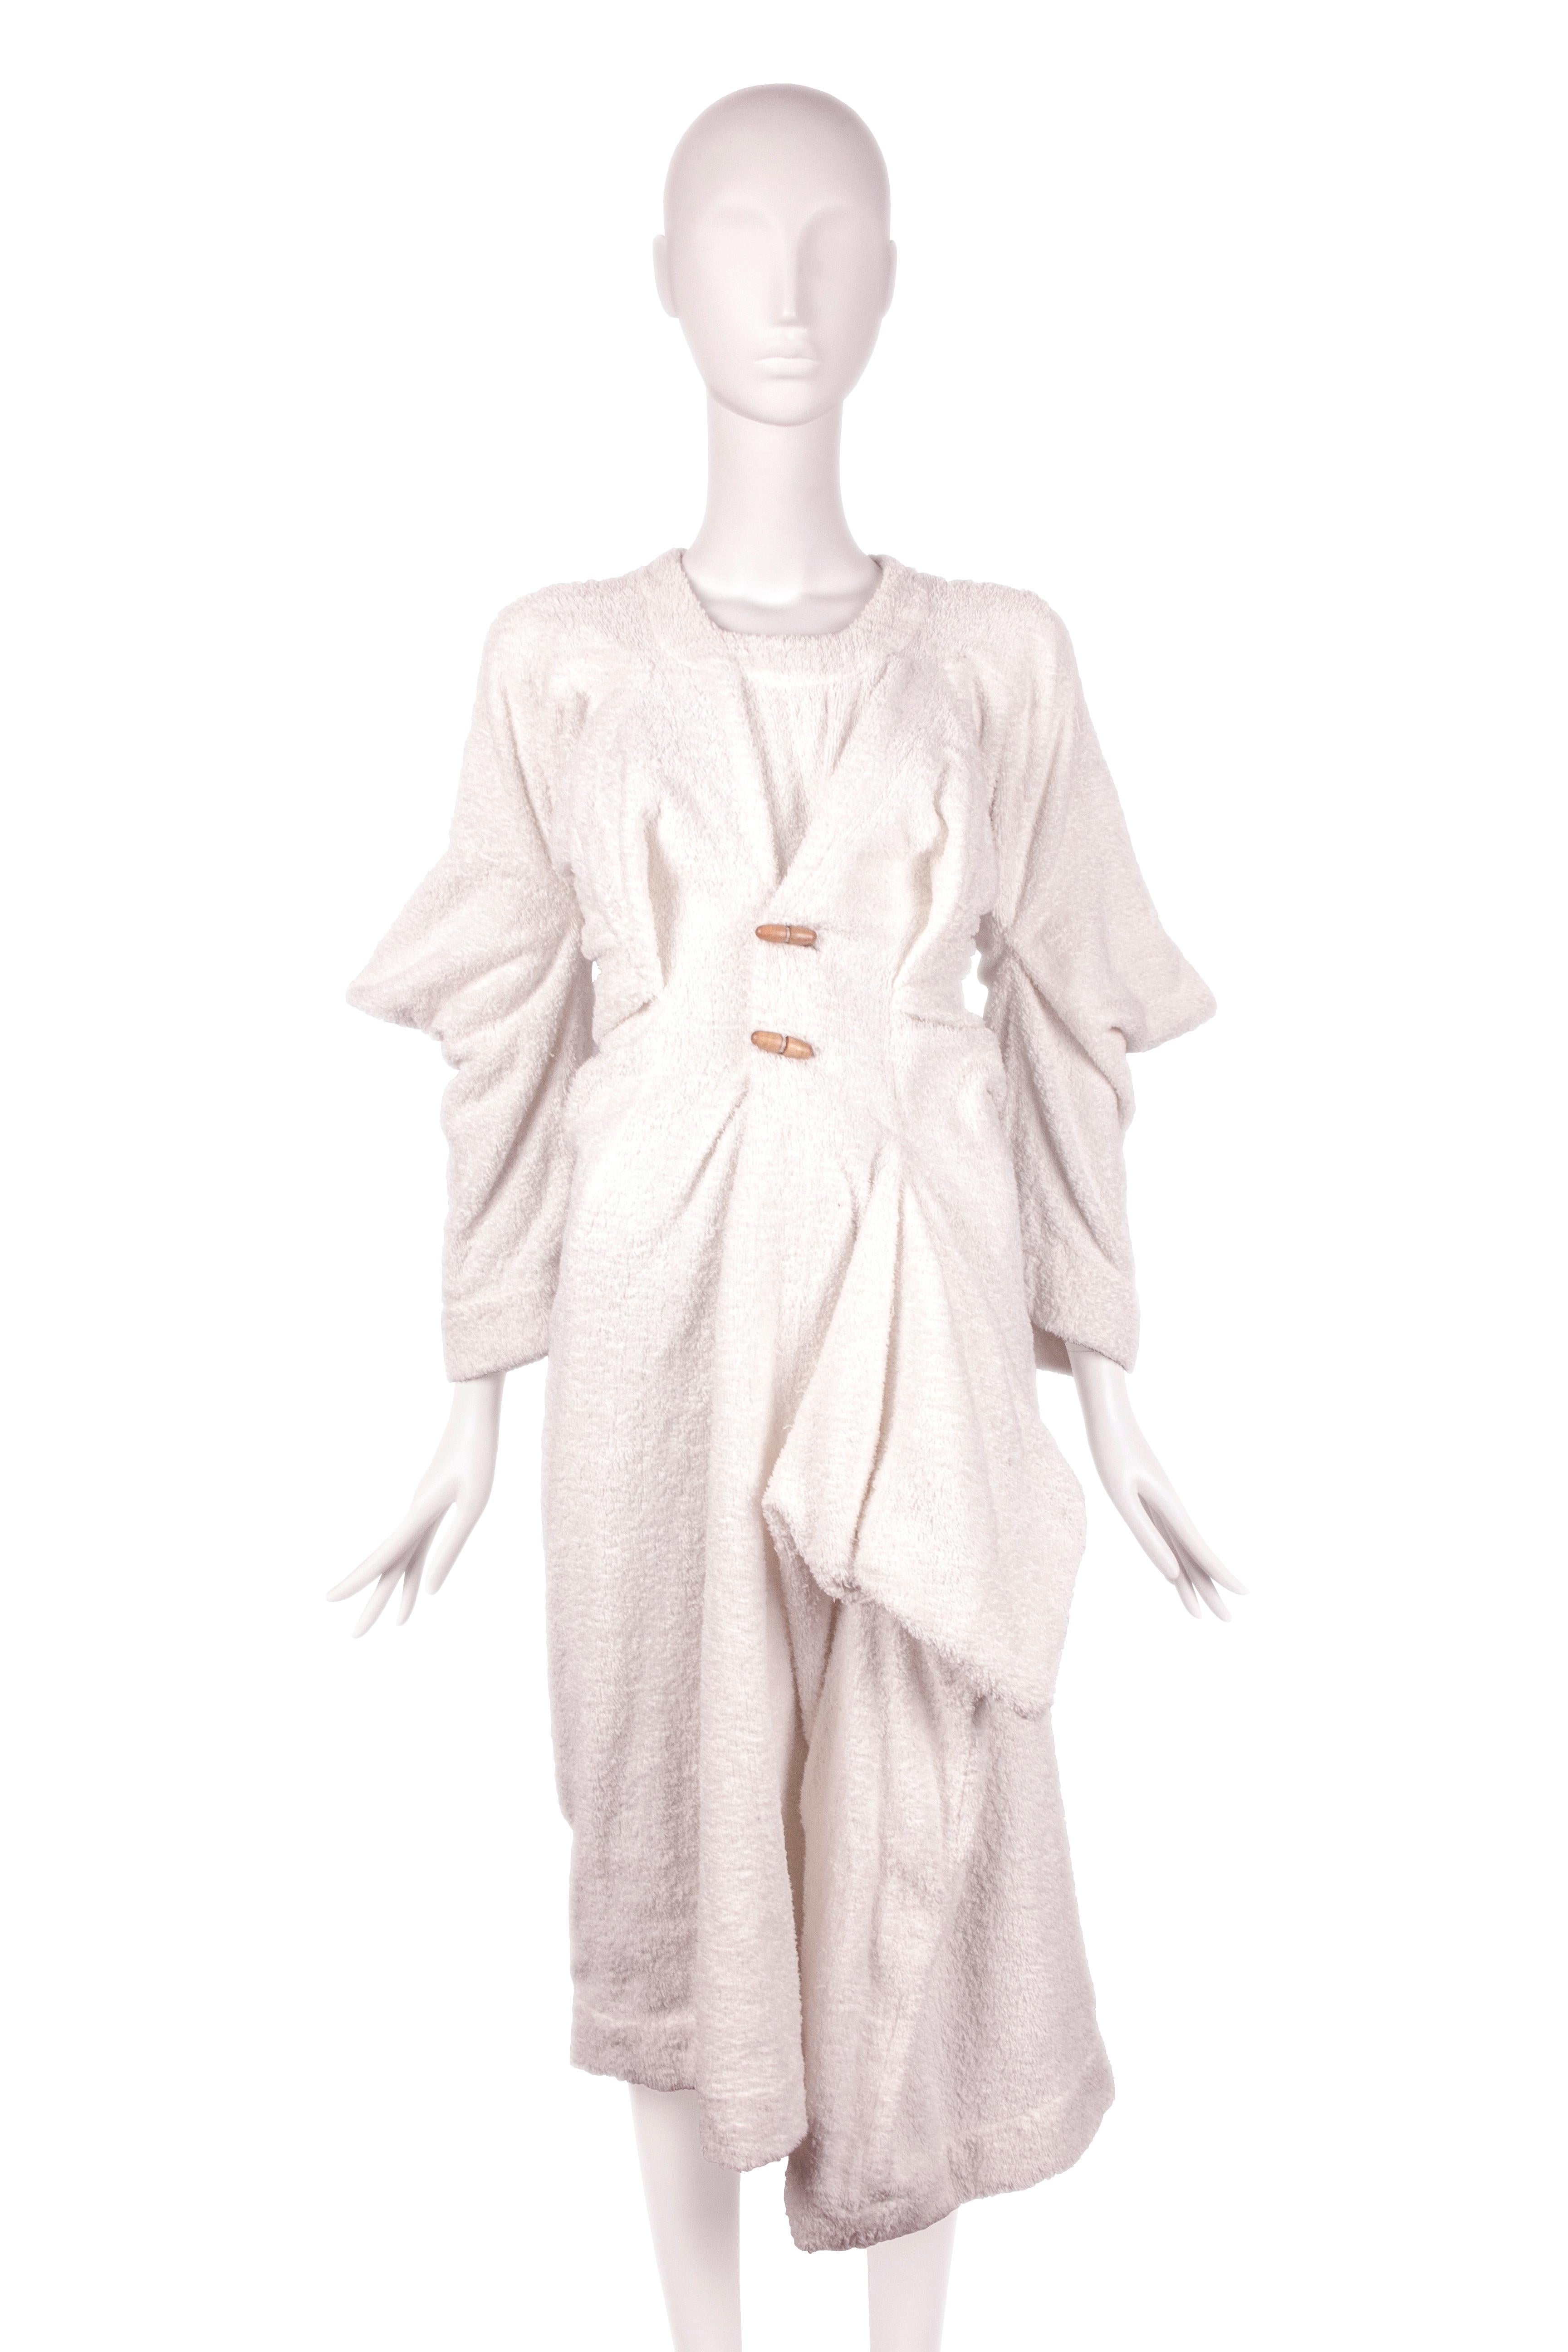 Worlds End by Vivienne Westwood cotton toweling 'Witches' dress, fw 1983 In Excellent Condition For Sale In Melbourne, AU